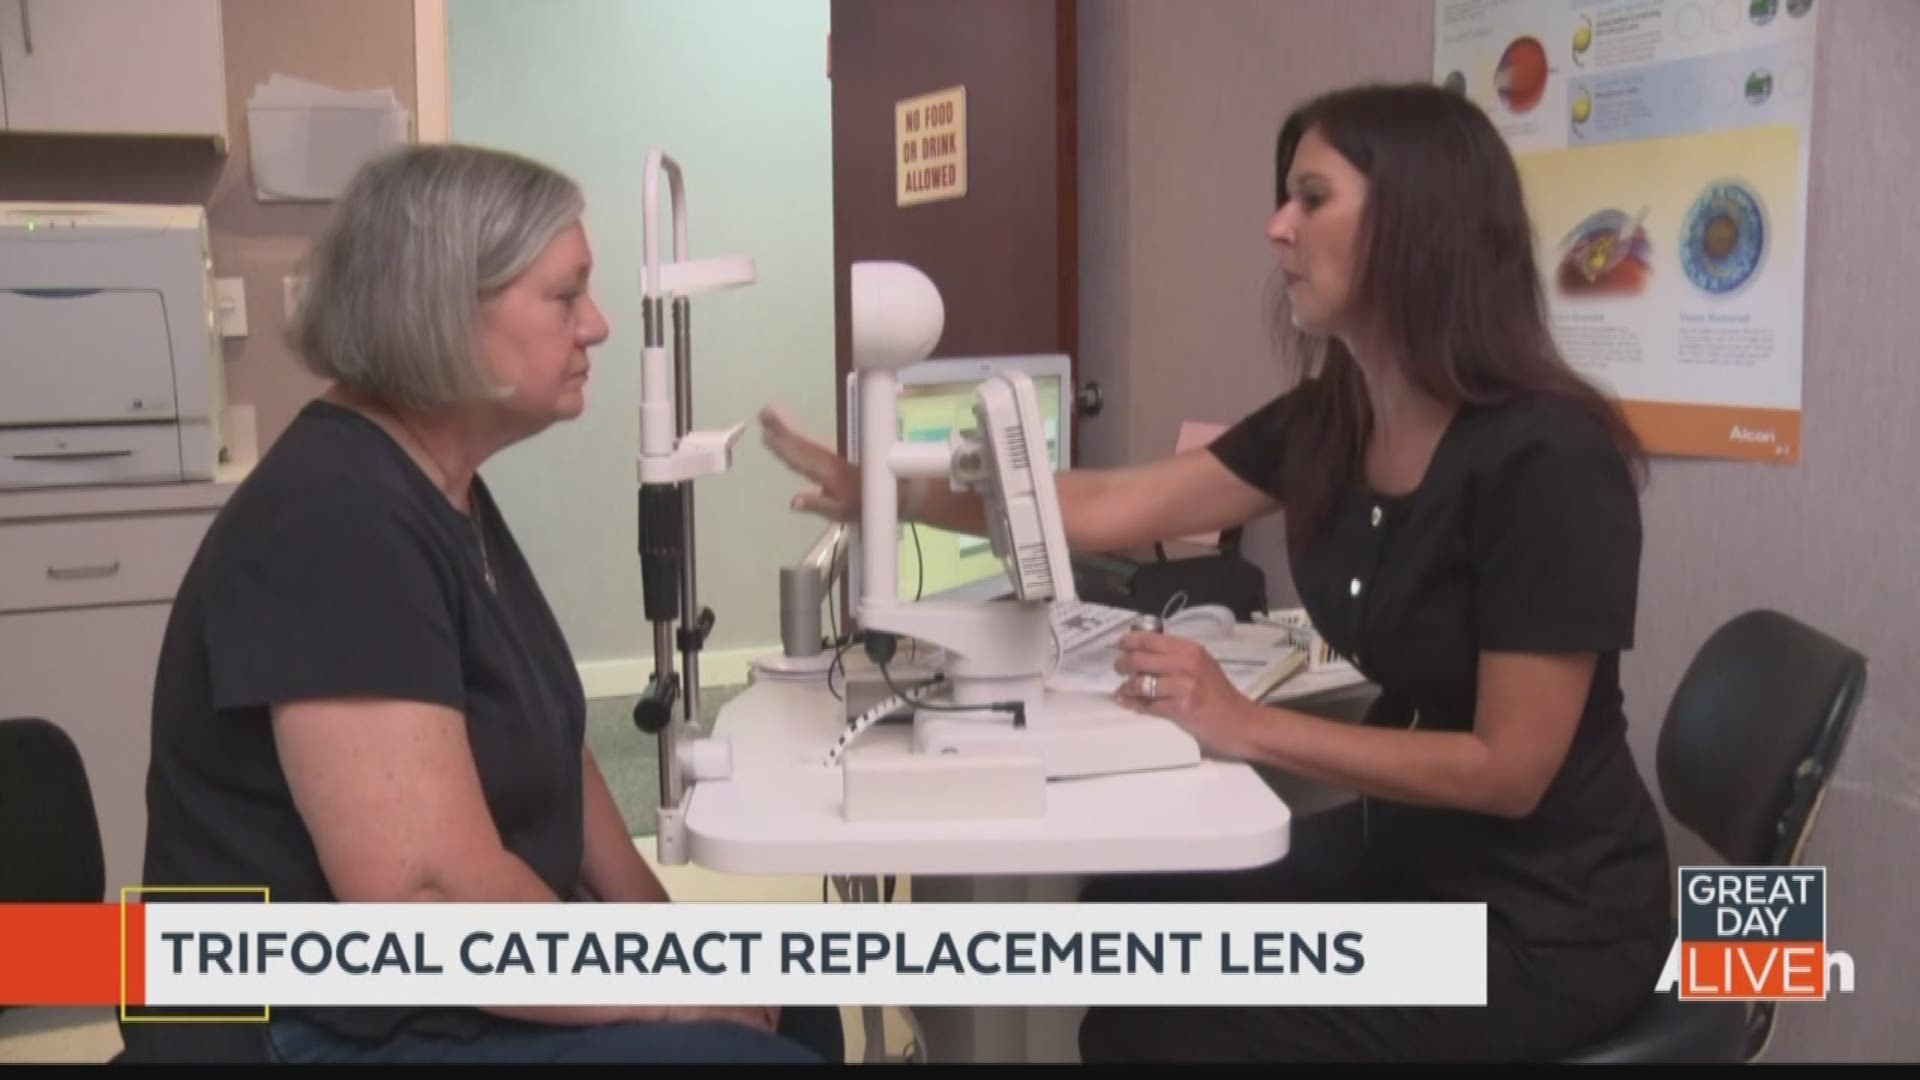 Help for those suffering from cataracts.